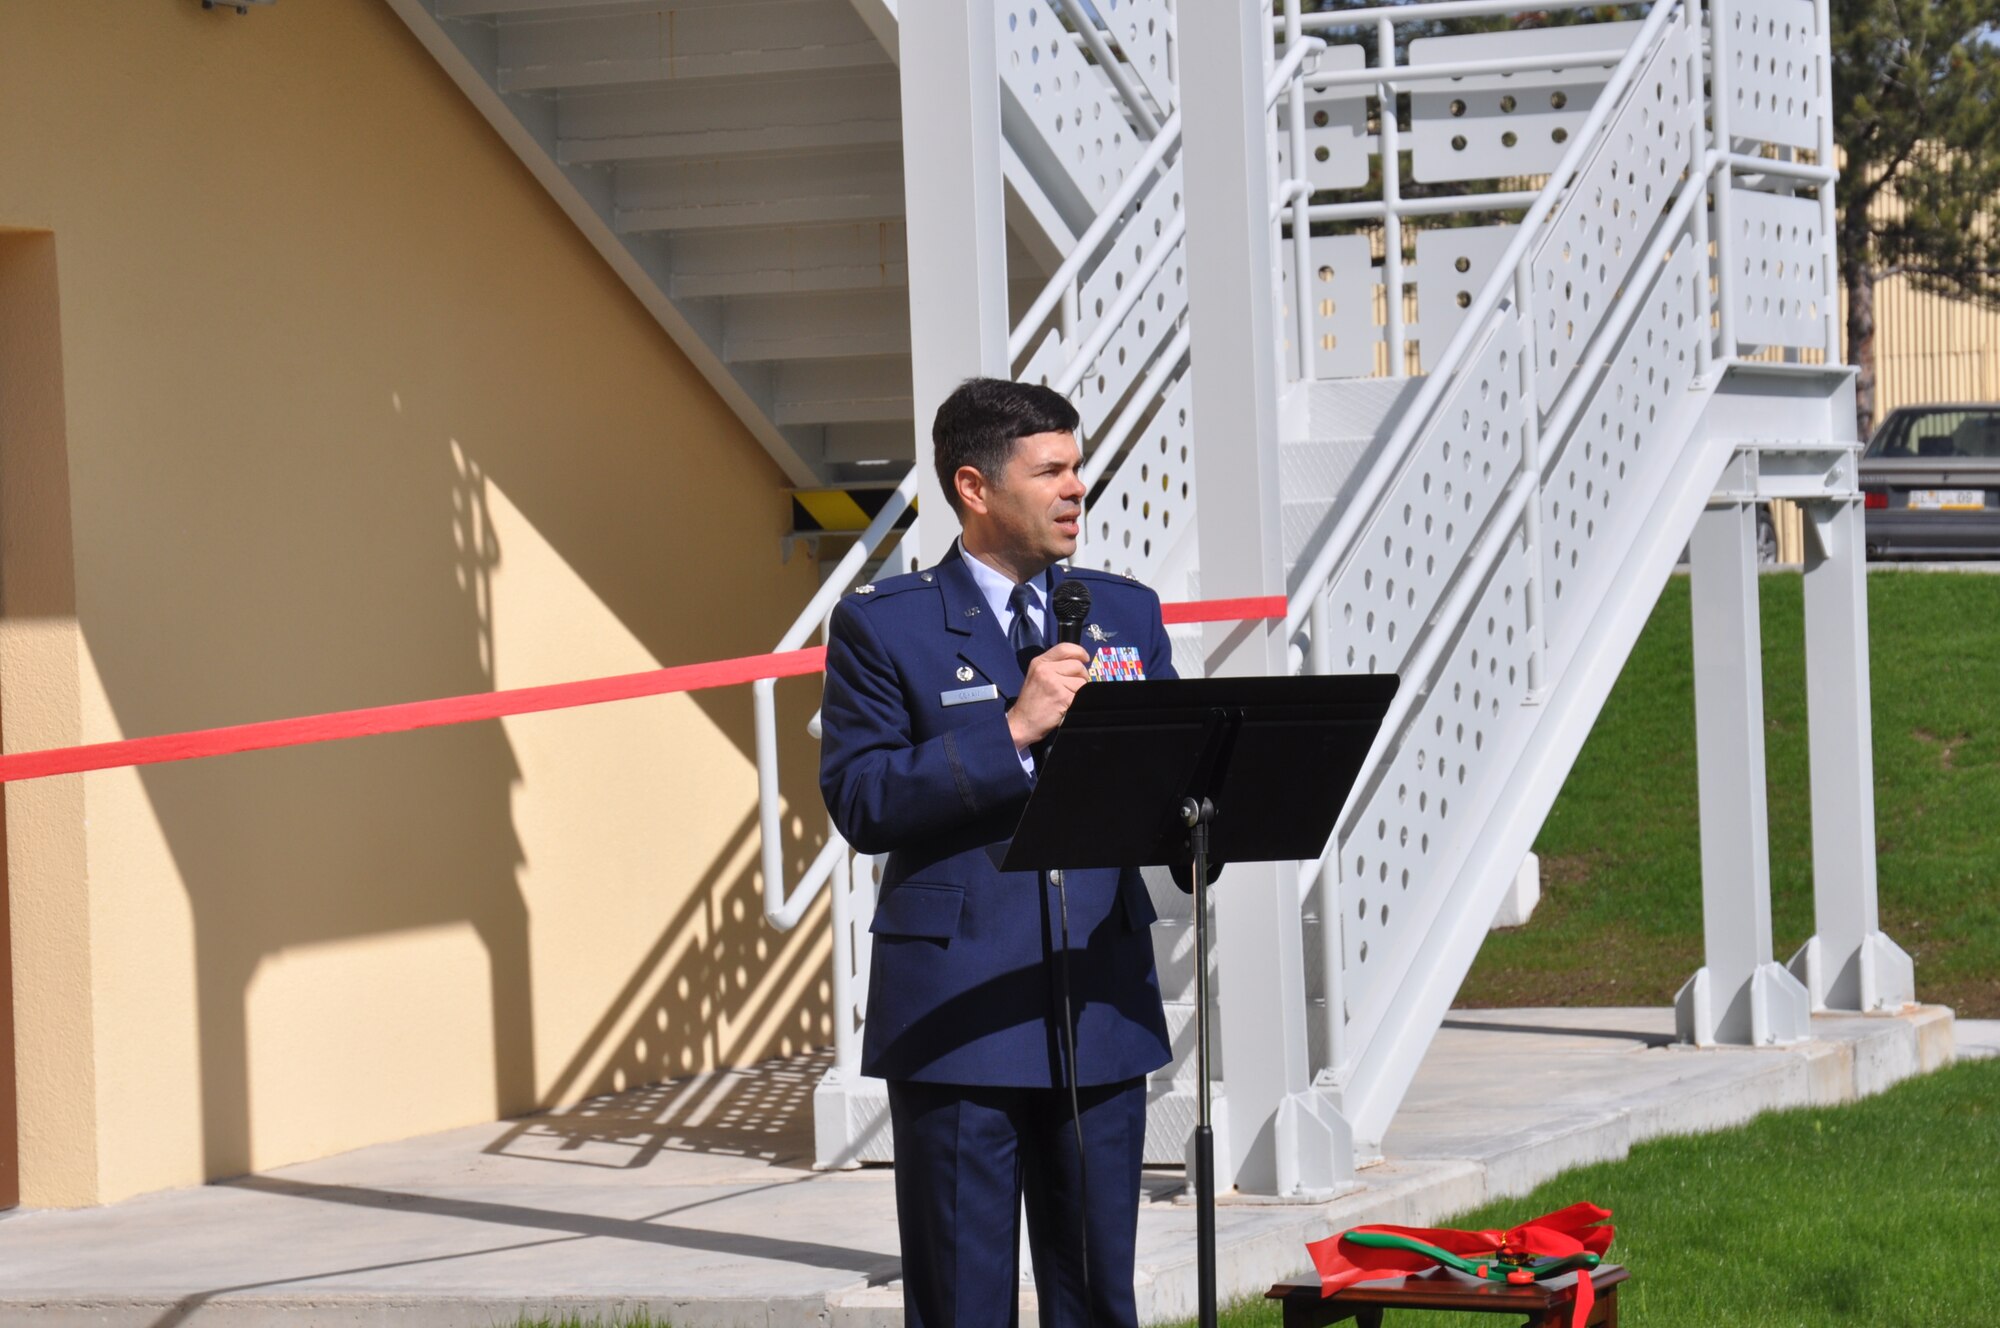 U.S. Air Force Lt. Col. Emanuel Cohan, 717th Air Base Squadron commander, speaks during the grand opening of the new base administrative building March 26, 2015, at the Ankara Support Facility in Turkey.  This new building, number 2621, is located adjacent to the Base Exchange. (U.S. Air Force photo by Capt. Laura Balch/Released)